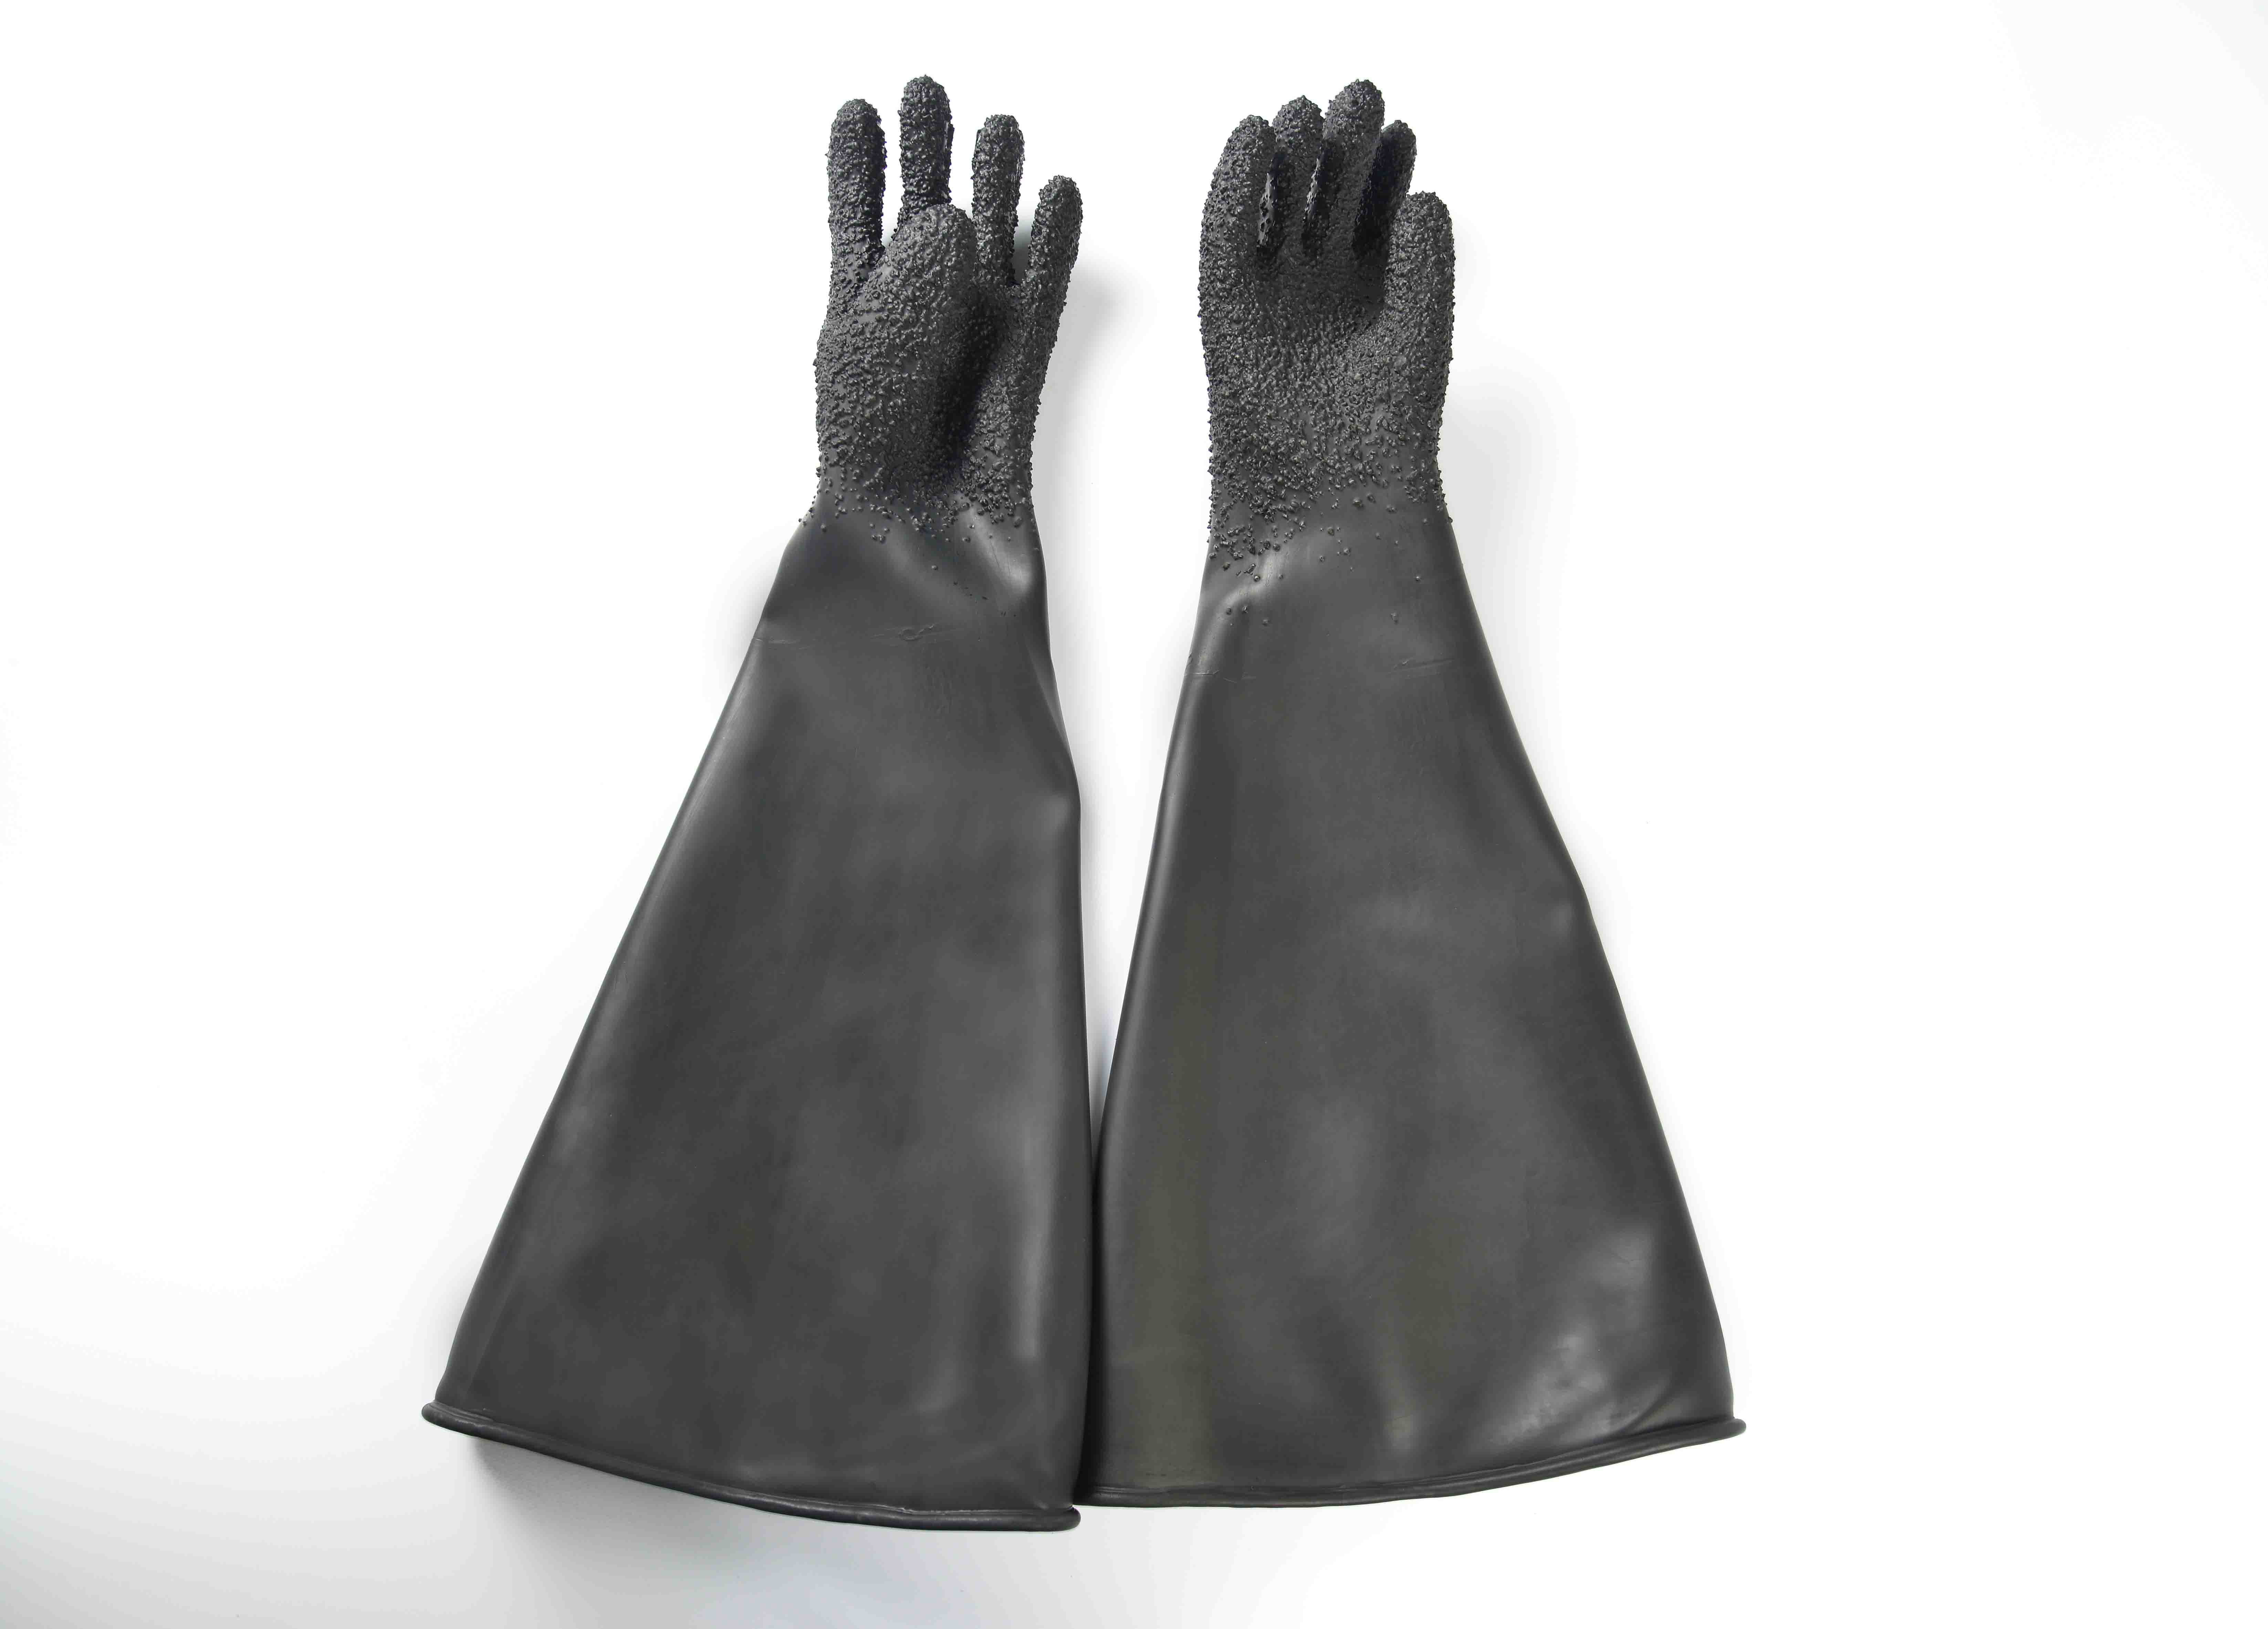 Wholesale Price 26″ Industrial rubber glove-Granule finish supply for Chile